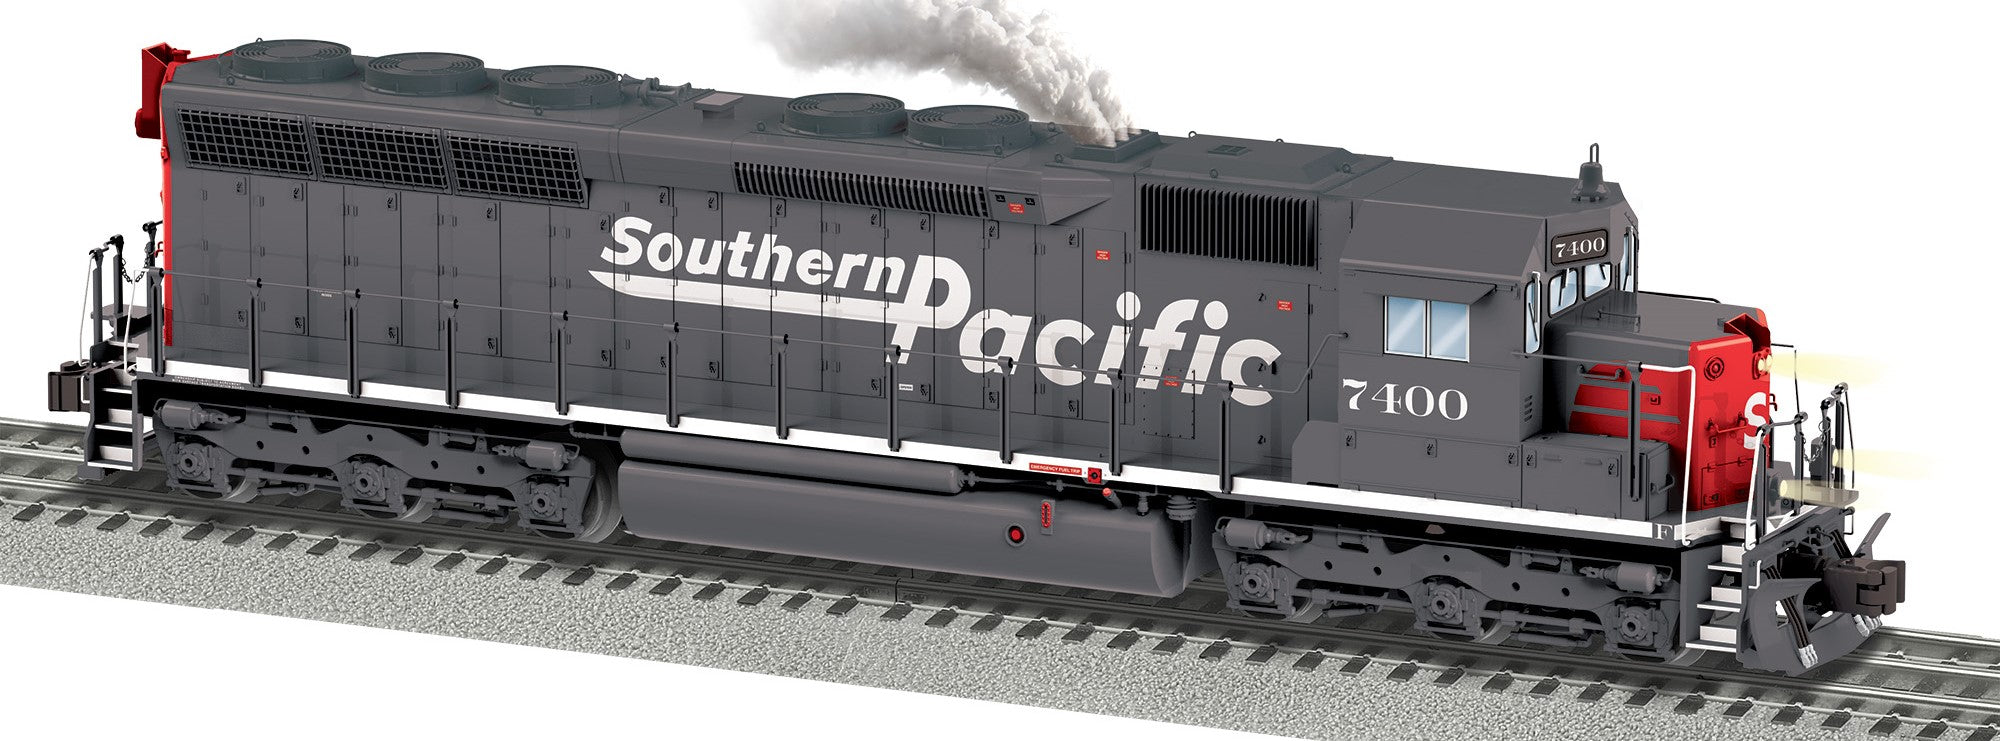 Lionel 2433571 - Legacy SD45 Diesel Locomotive "Southern Pacific" #7400